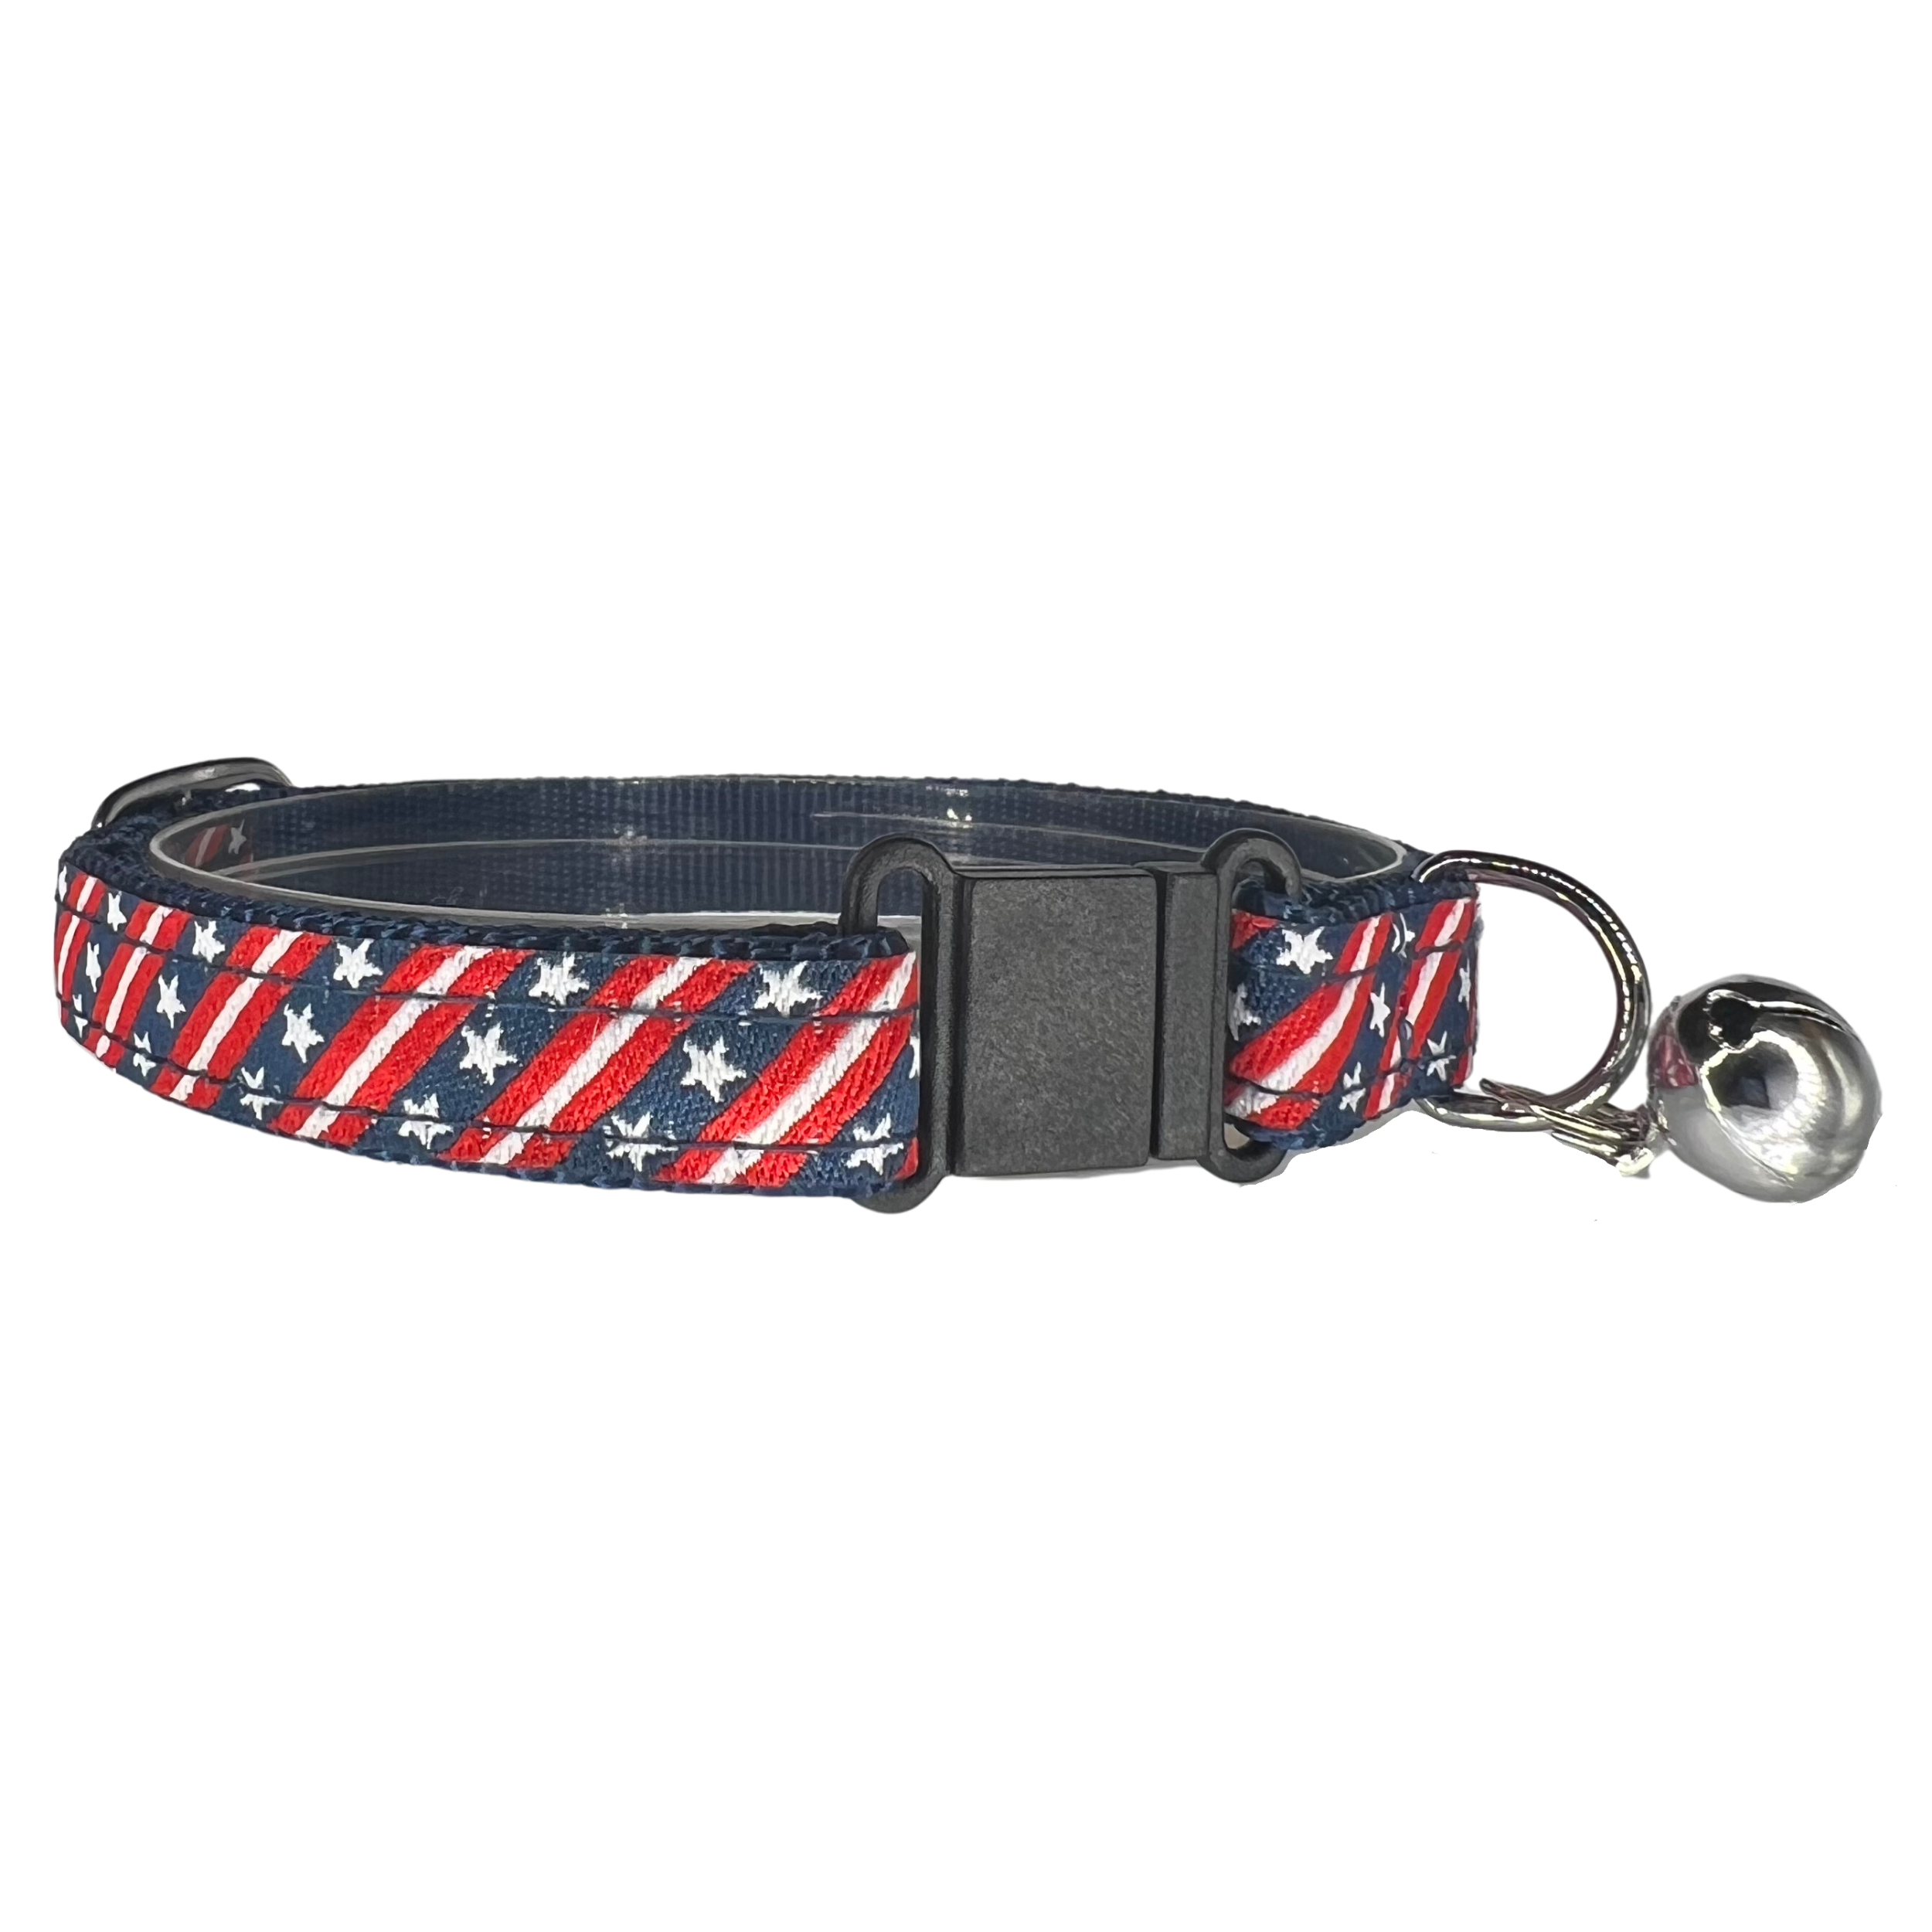 BIAS-STARS-STRIPES-CAT-COLLAR-WITH-BELL